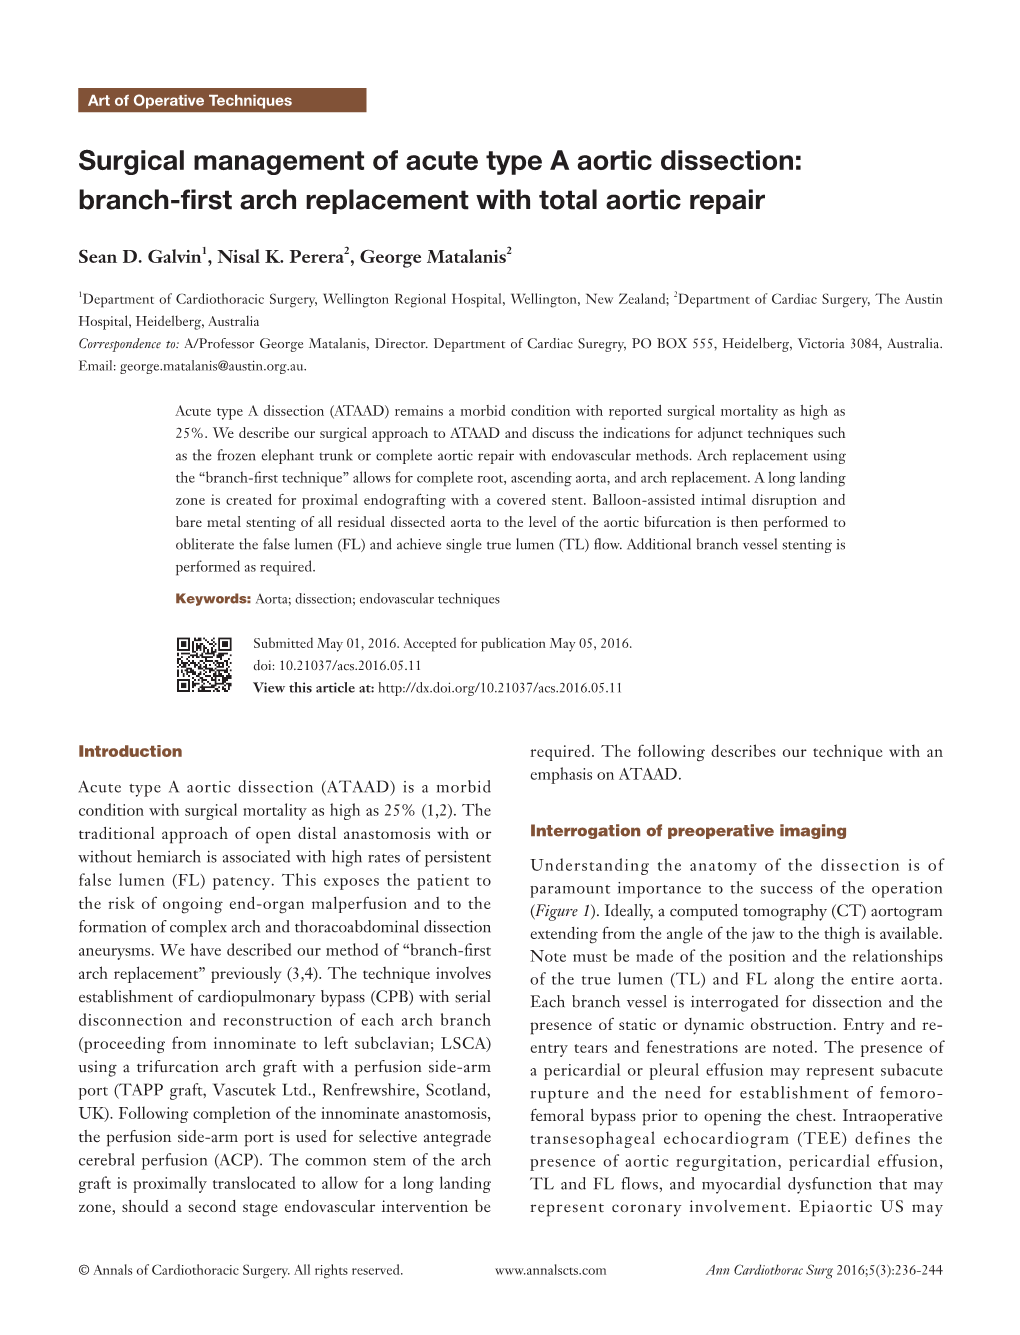 Surgical Management of Acute Type a Aortic Dissection: Branch-First Arch Replacement with Total Aortic Repair